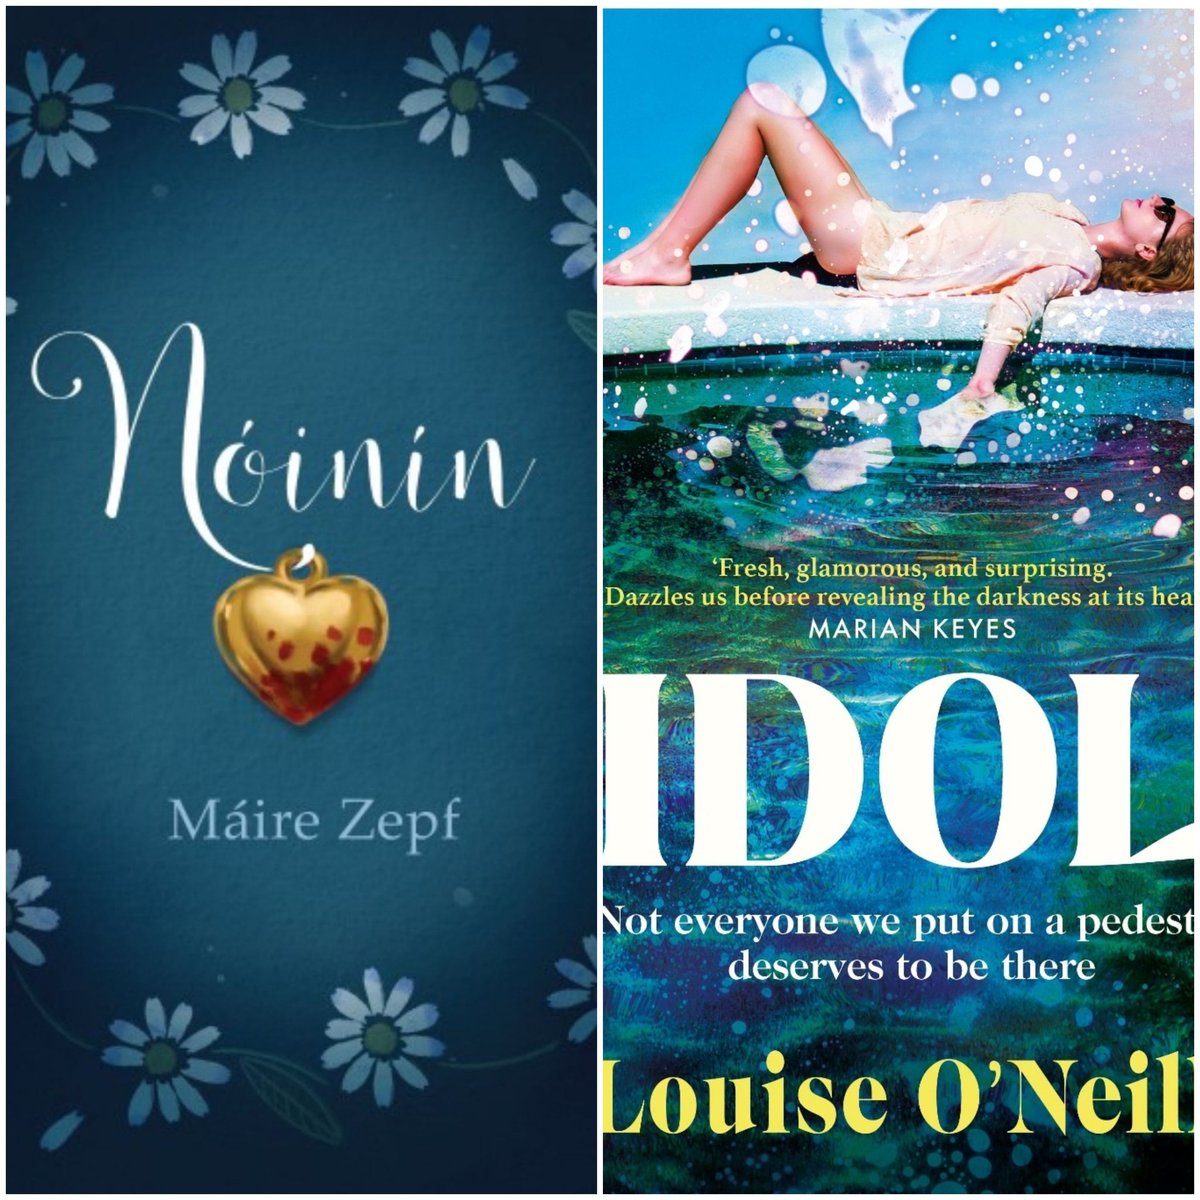 Day 21 of #ReadIrishWomenChallenge24 A book that talks about social media. @oneilllo's novel Idol for adults (although her YA titles would fit this prompt too). For YA readers, Nóinín by @MyraZepf. @LiteracyLink1 @FoxrockLoreto @DubrayBooks @IrishKidsBooks @CoisLife